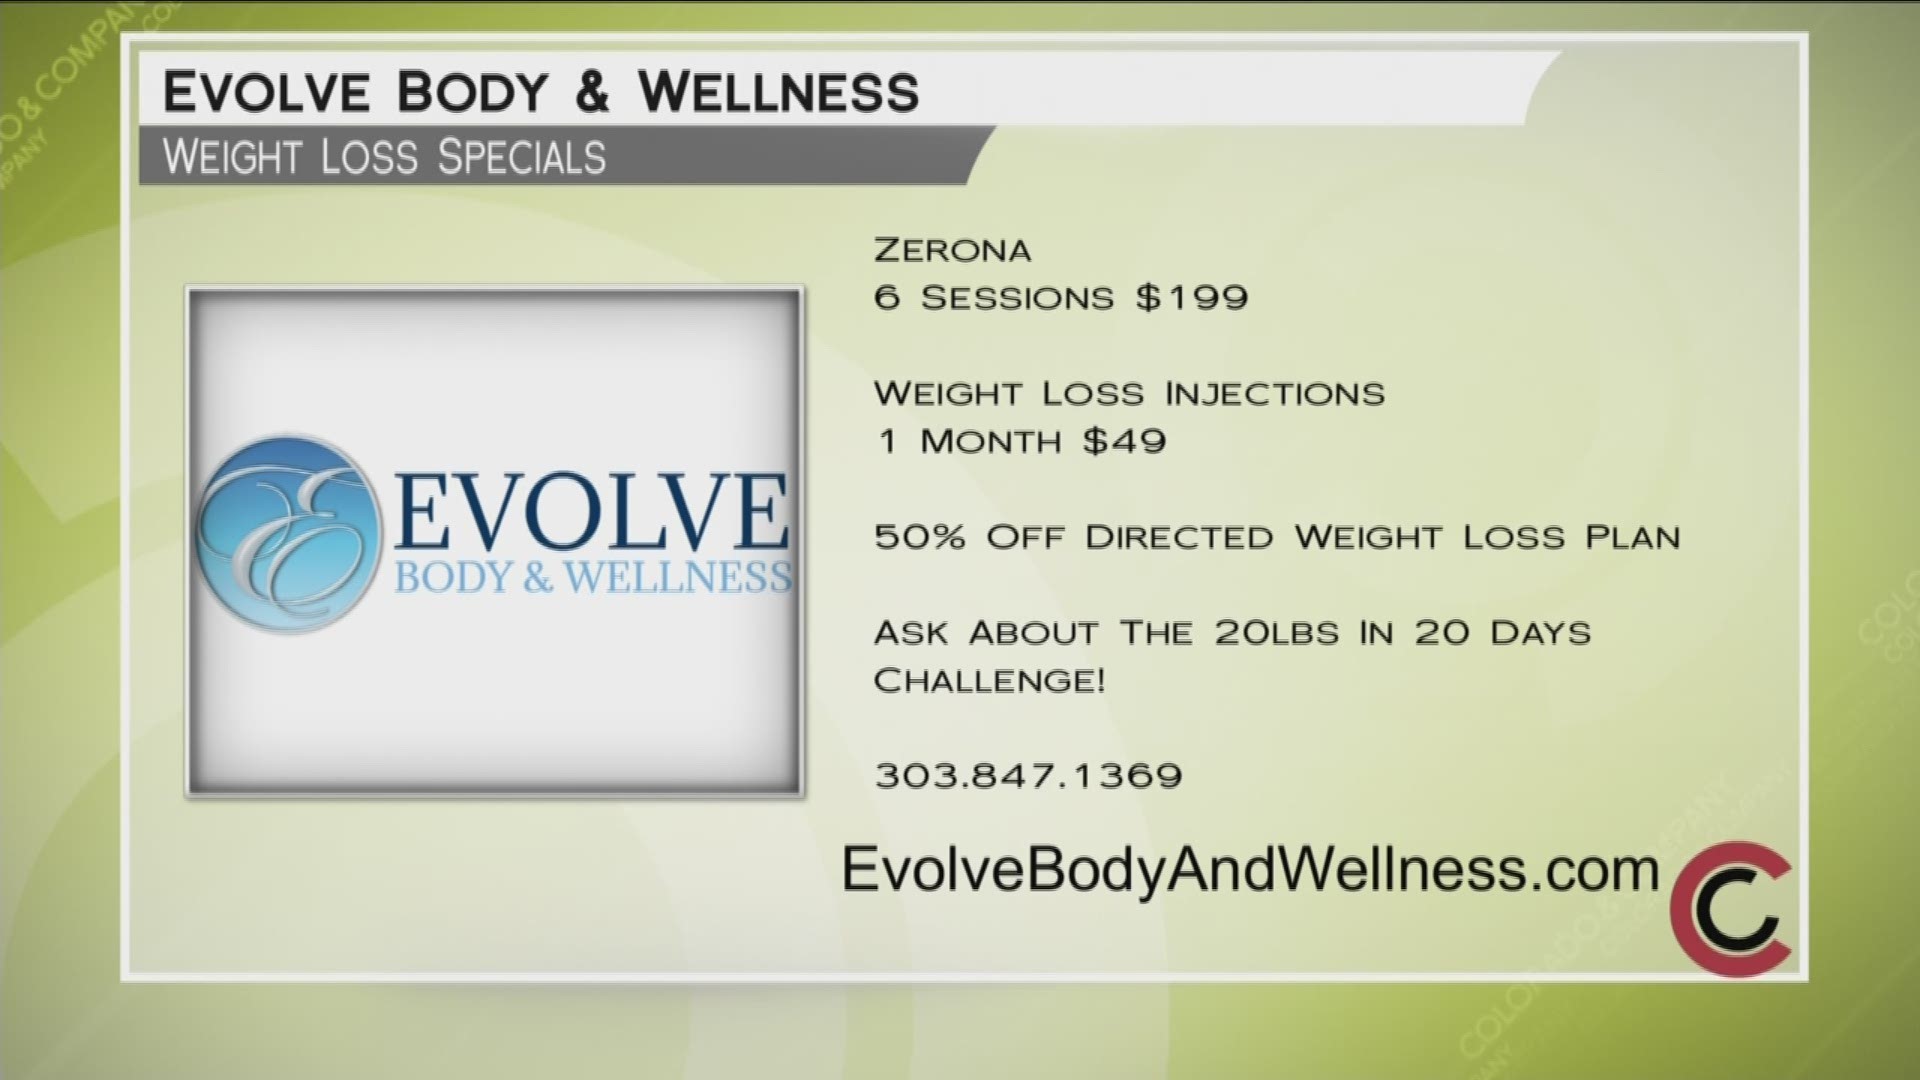 Evolve Med Spa is giving the first 10 callers 6 Zerona sessions for only $199. Other specials include 50% off weight loss programs, with $49 for a month of weight loss injections! Don’t forget about the 20 pounds in 20 days challenge. Call 303.847.1369 or visit www.EvolveBodyAndWellness.com. 
THIS INTERVIEW HAS COMMERCIAL CONTENT. PRODUCTS AND SERVICES FEATURED APPEAR AS PAID ADVERTISING.